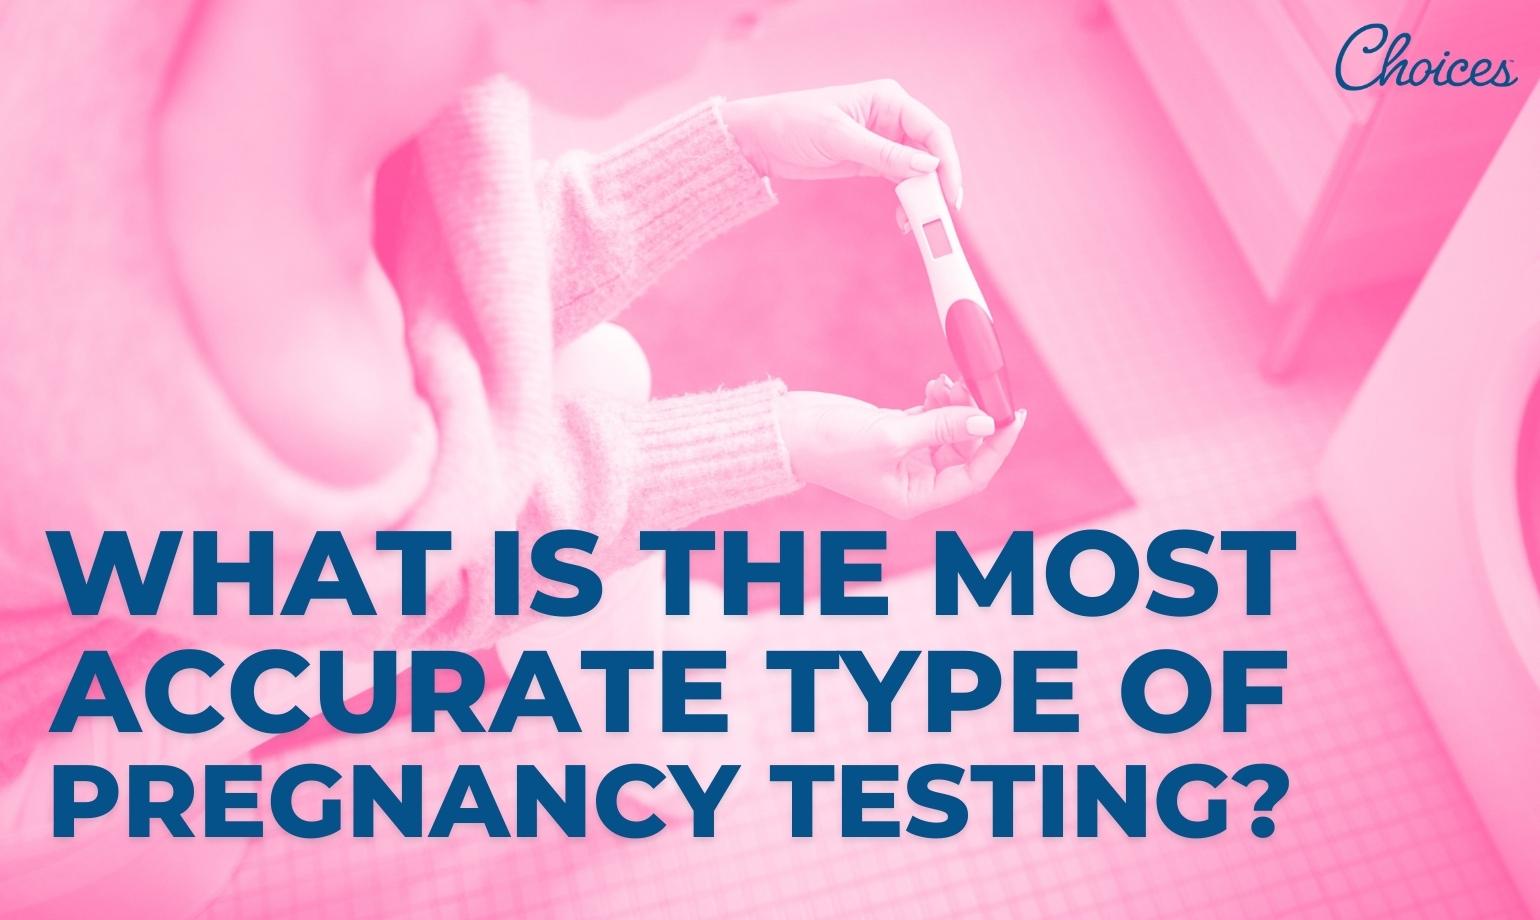 What Is The Most Accurate Type of Pregnancy Testing?